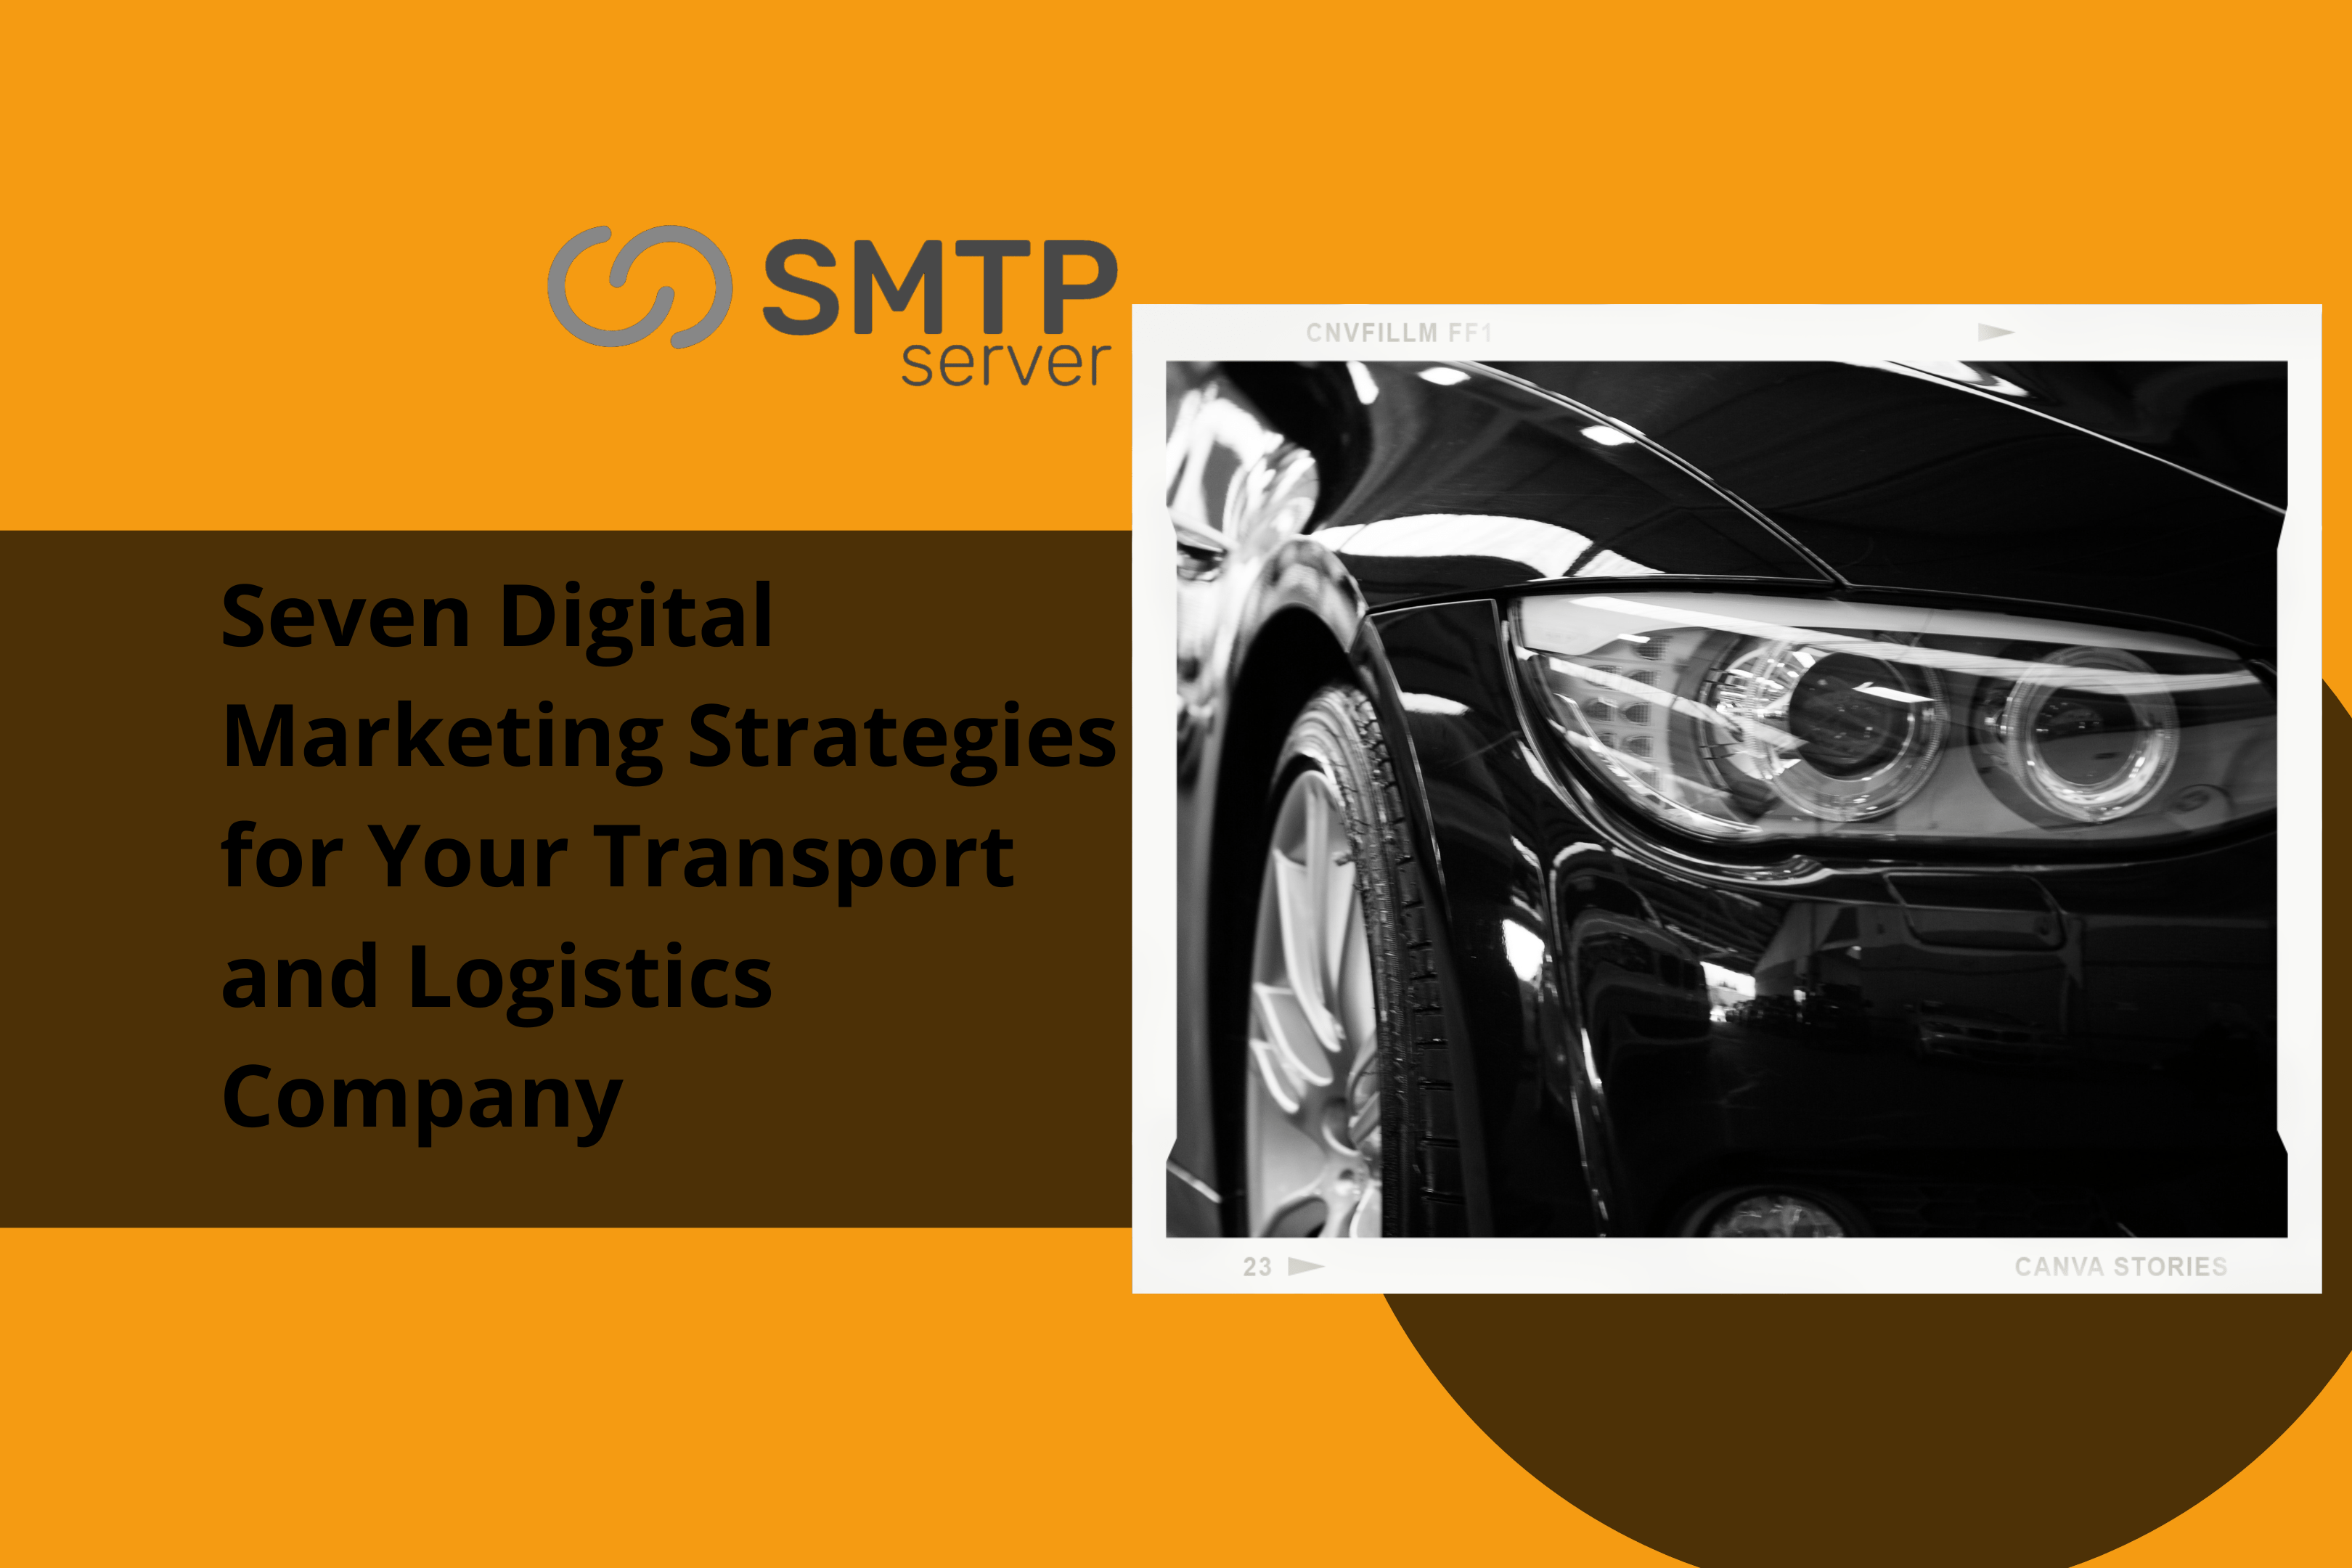 Seven Digital Marketing Strategies for Your Transport and Logistics Company